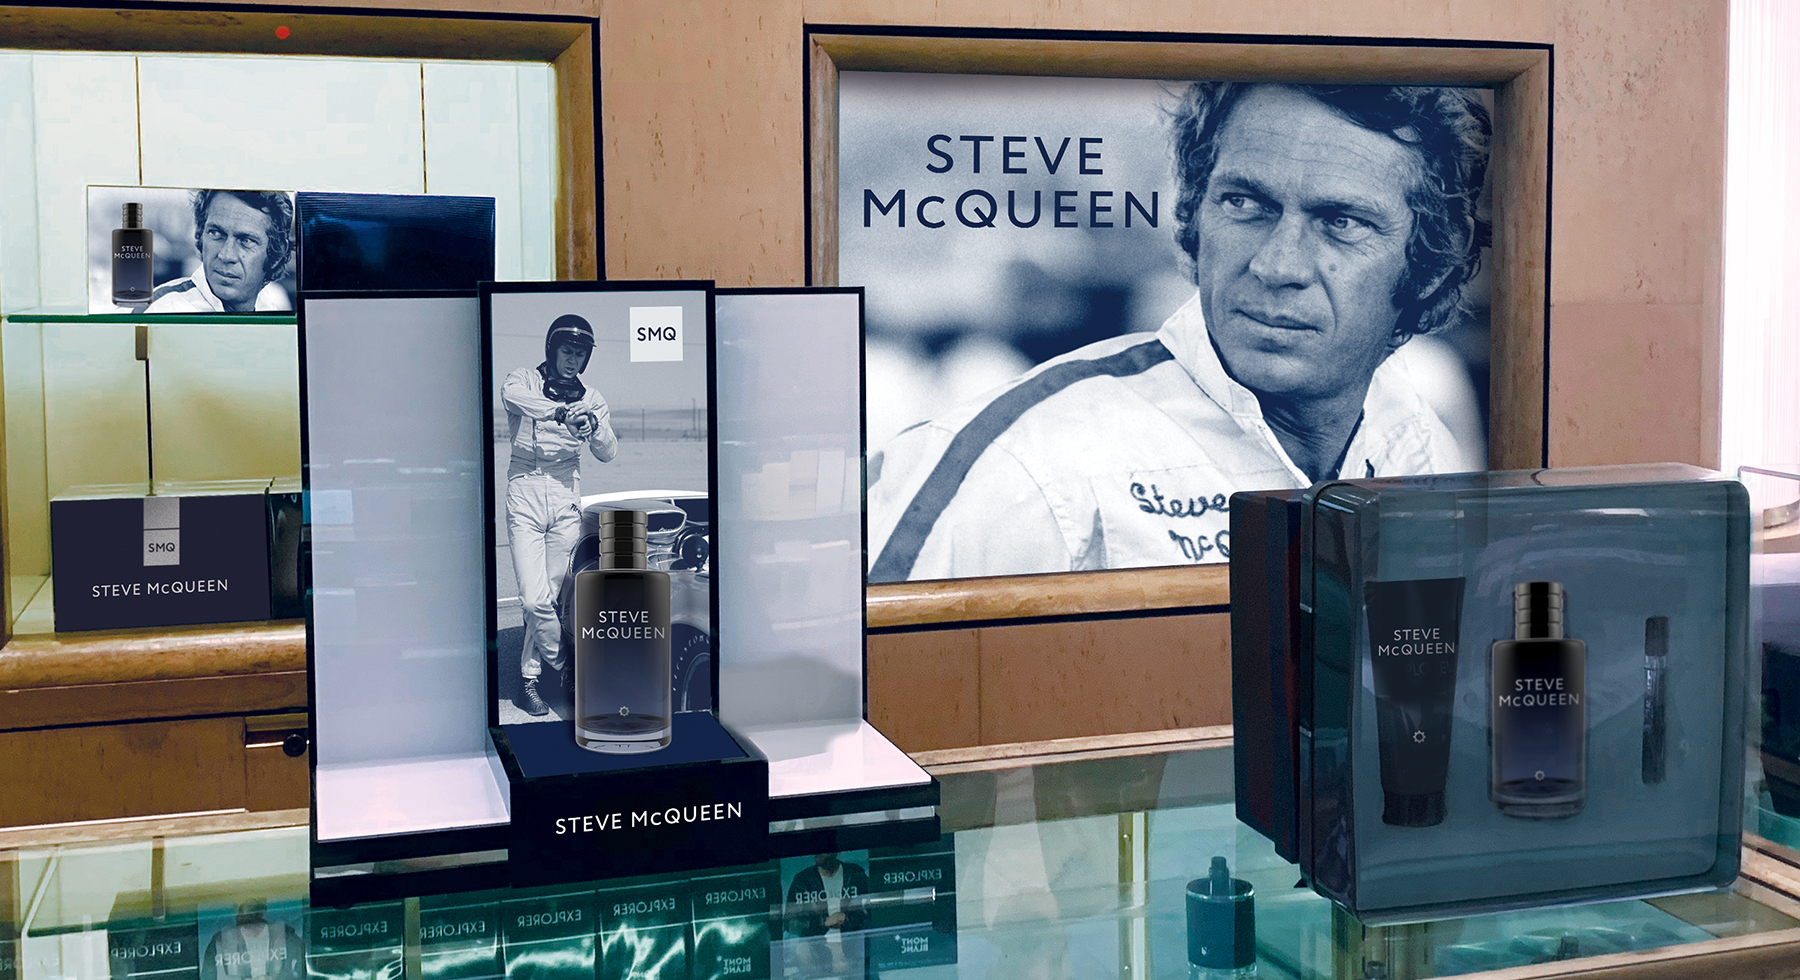 Steve McQueen Celebrity Licensing Products